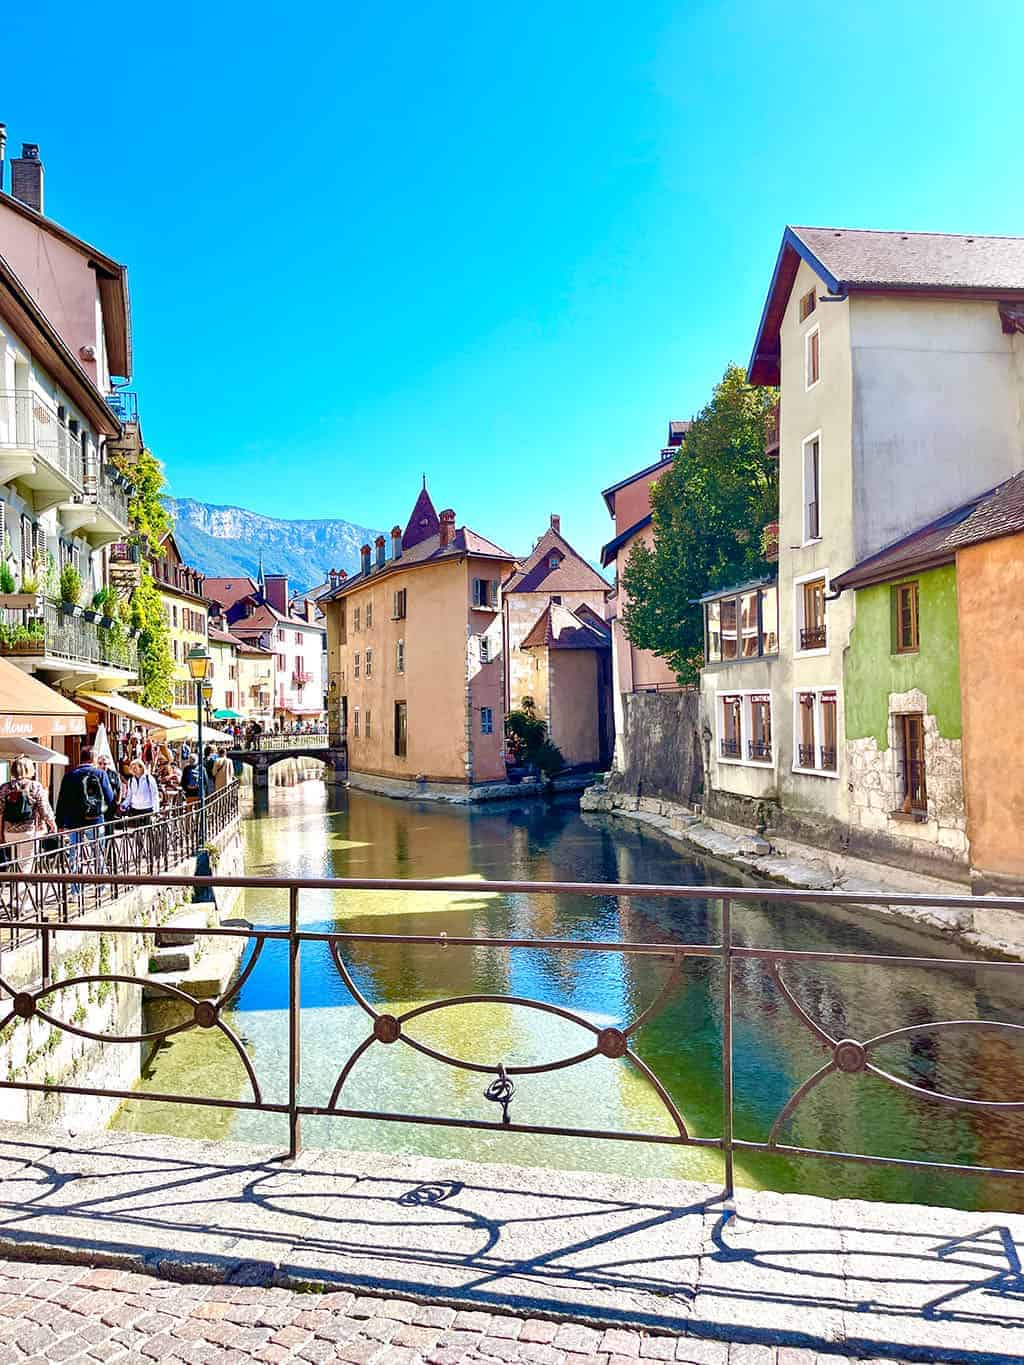 Day trip to Annecy France - Cobblestone streets, colorful architecture, and a stunning crystal blue lake.